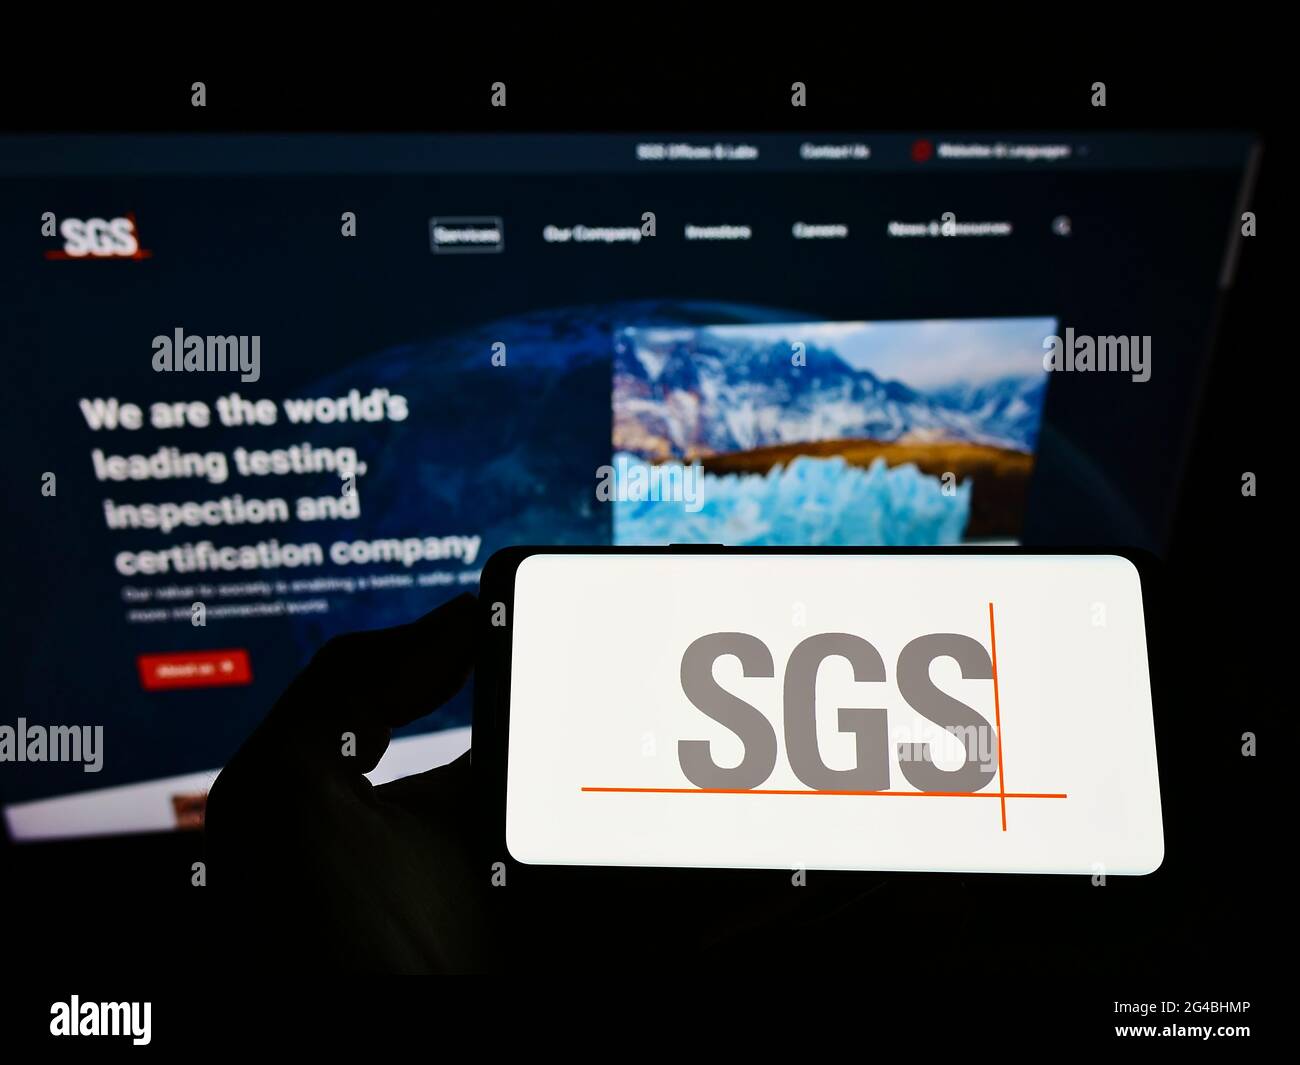 Person holding smartphone with logo of Swiss certification company SGS S.A. on screen in front of website. Focus on phone display. Stock Photo